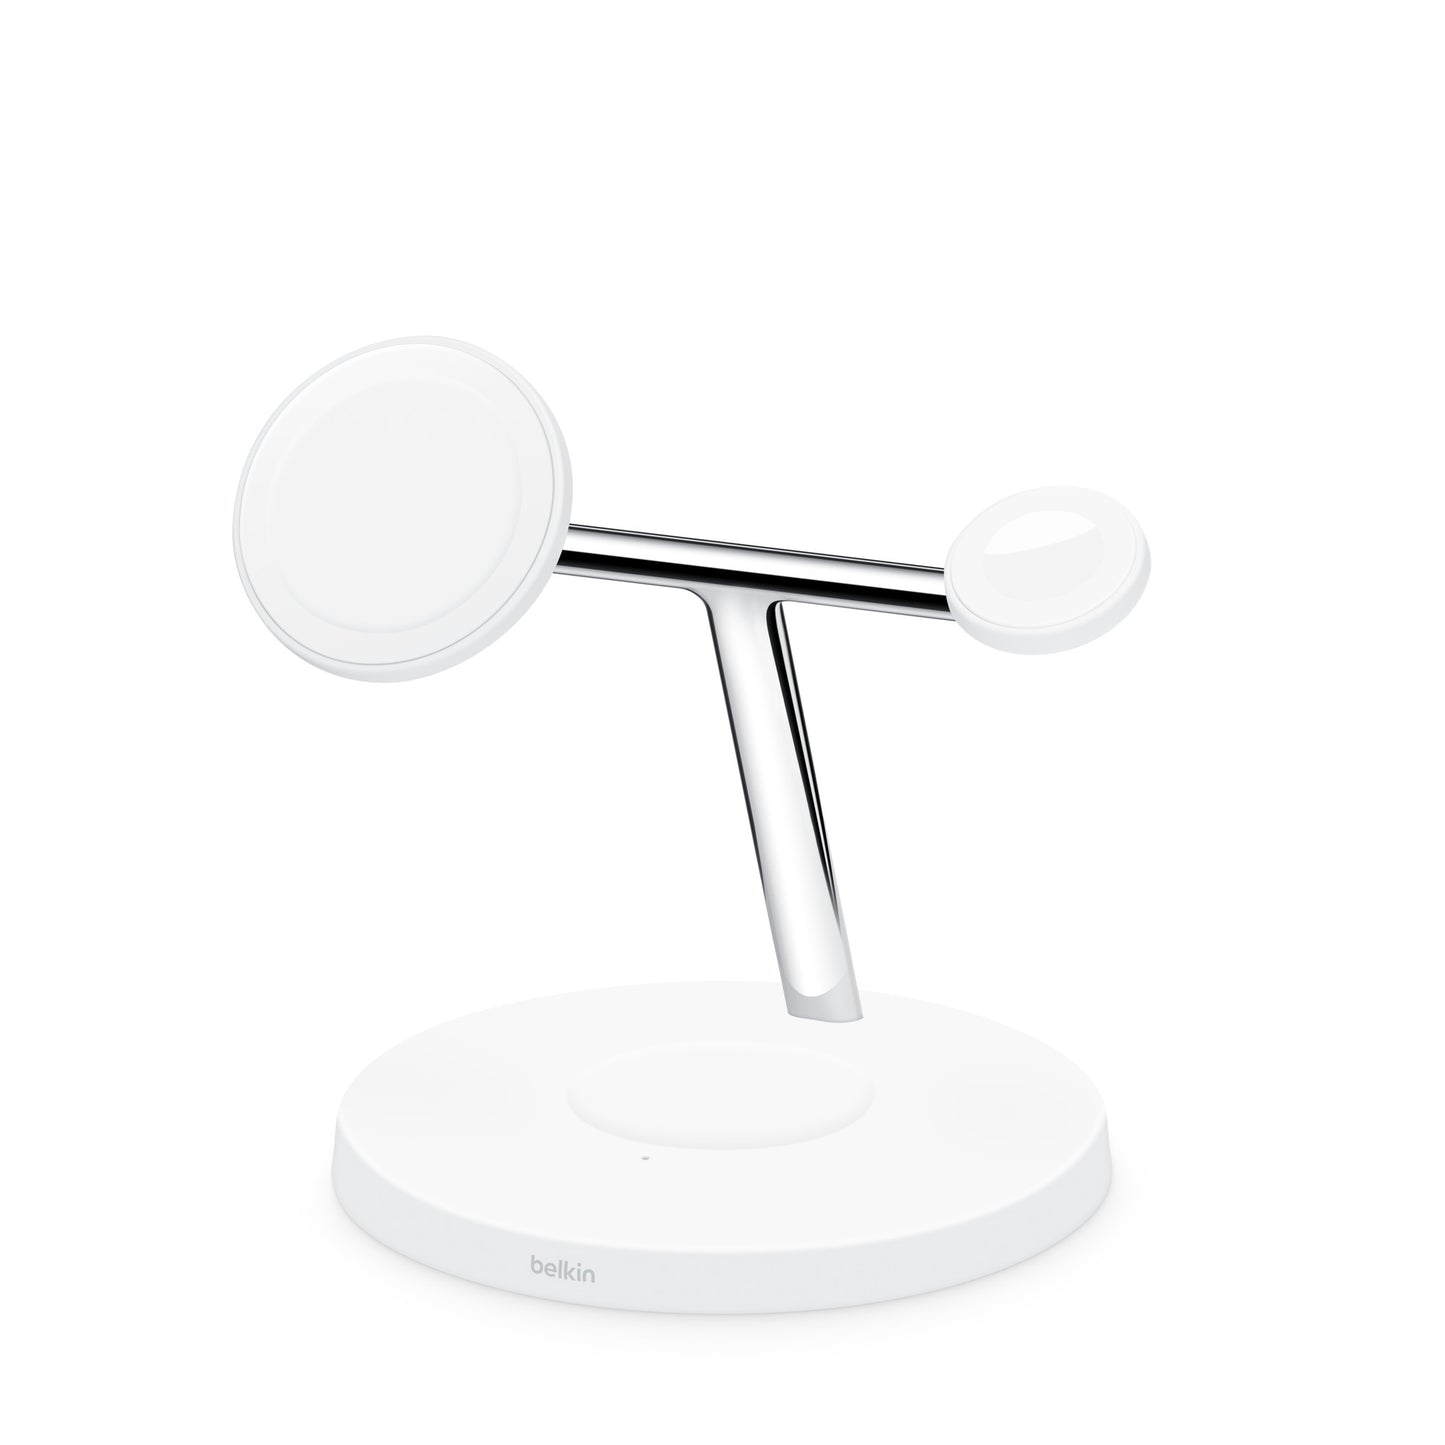 BELKIN 3-in-1 Wireless Charging Stand with MagSafe - White